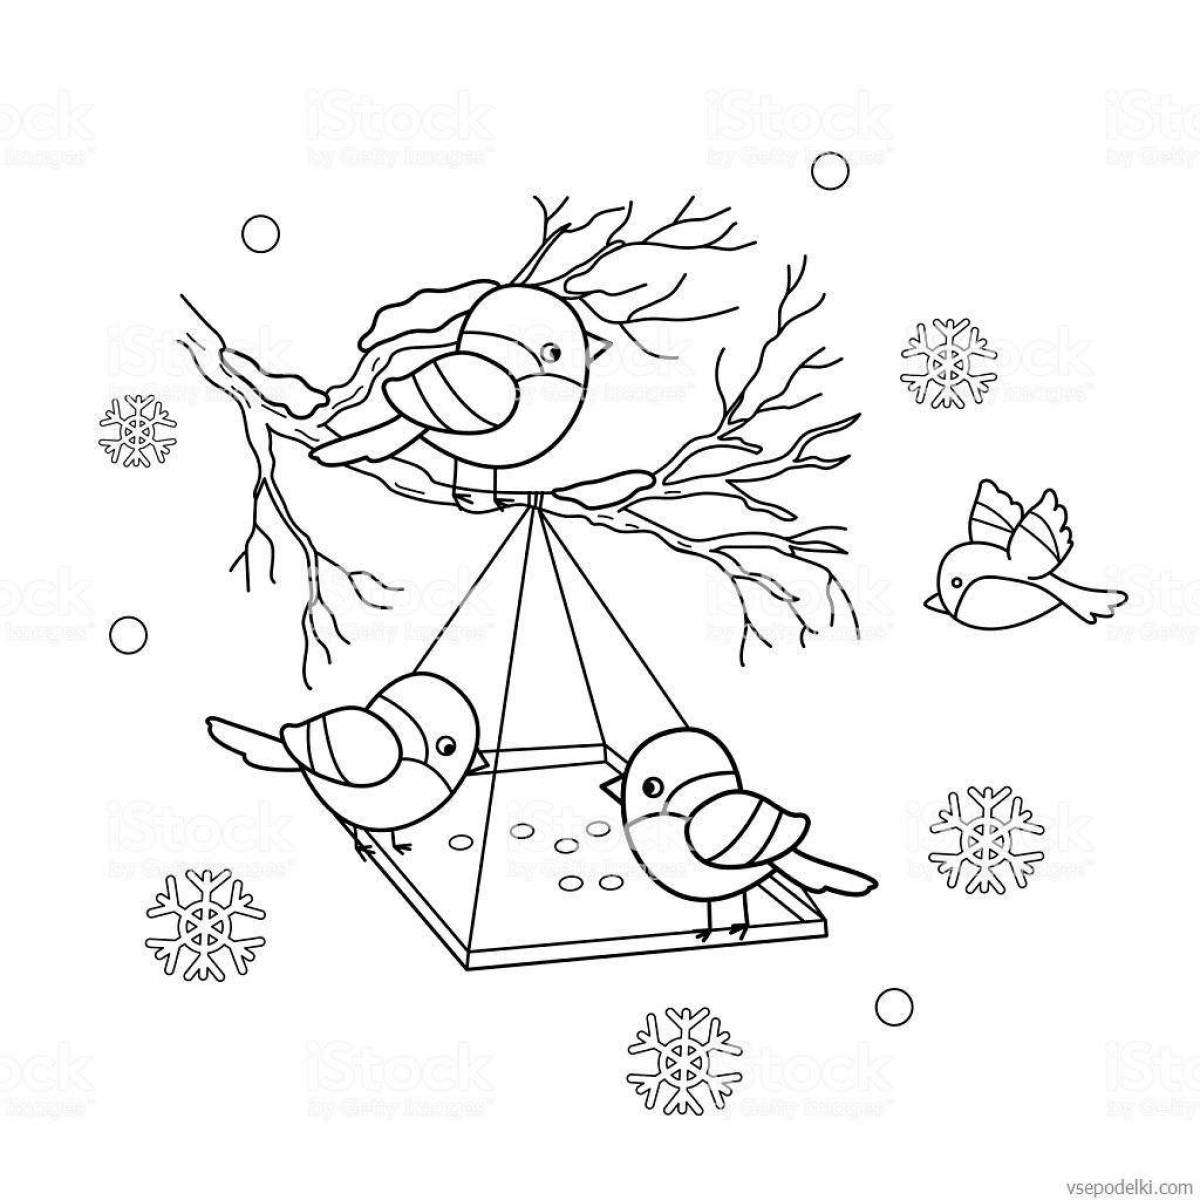 Adorable bullfinch coloring page for children 6-7 years old